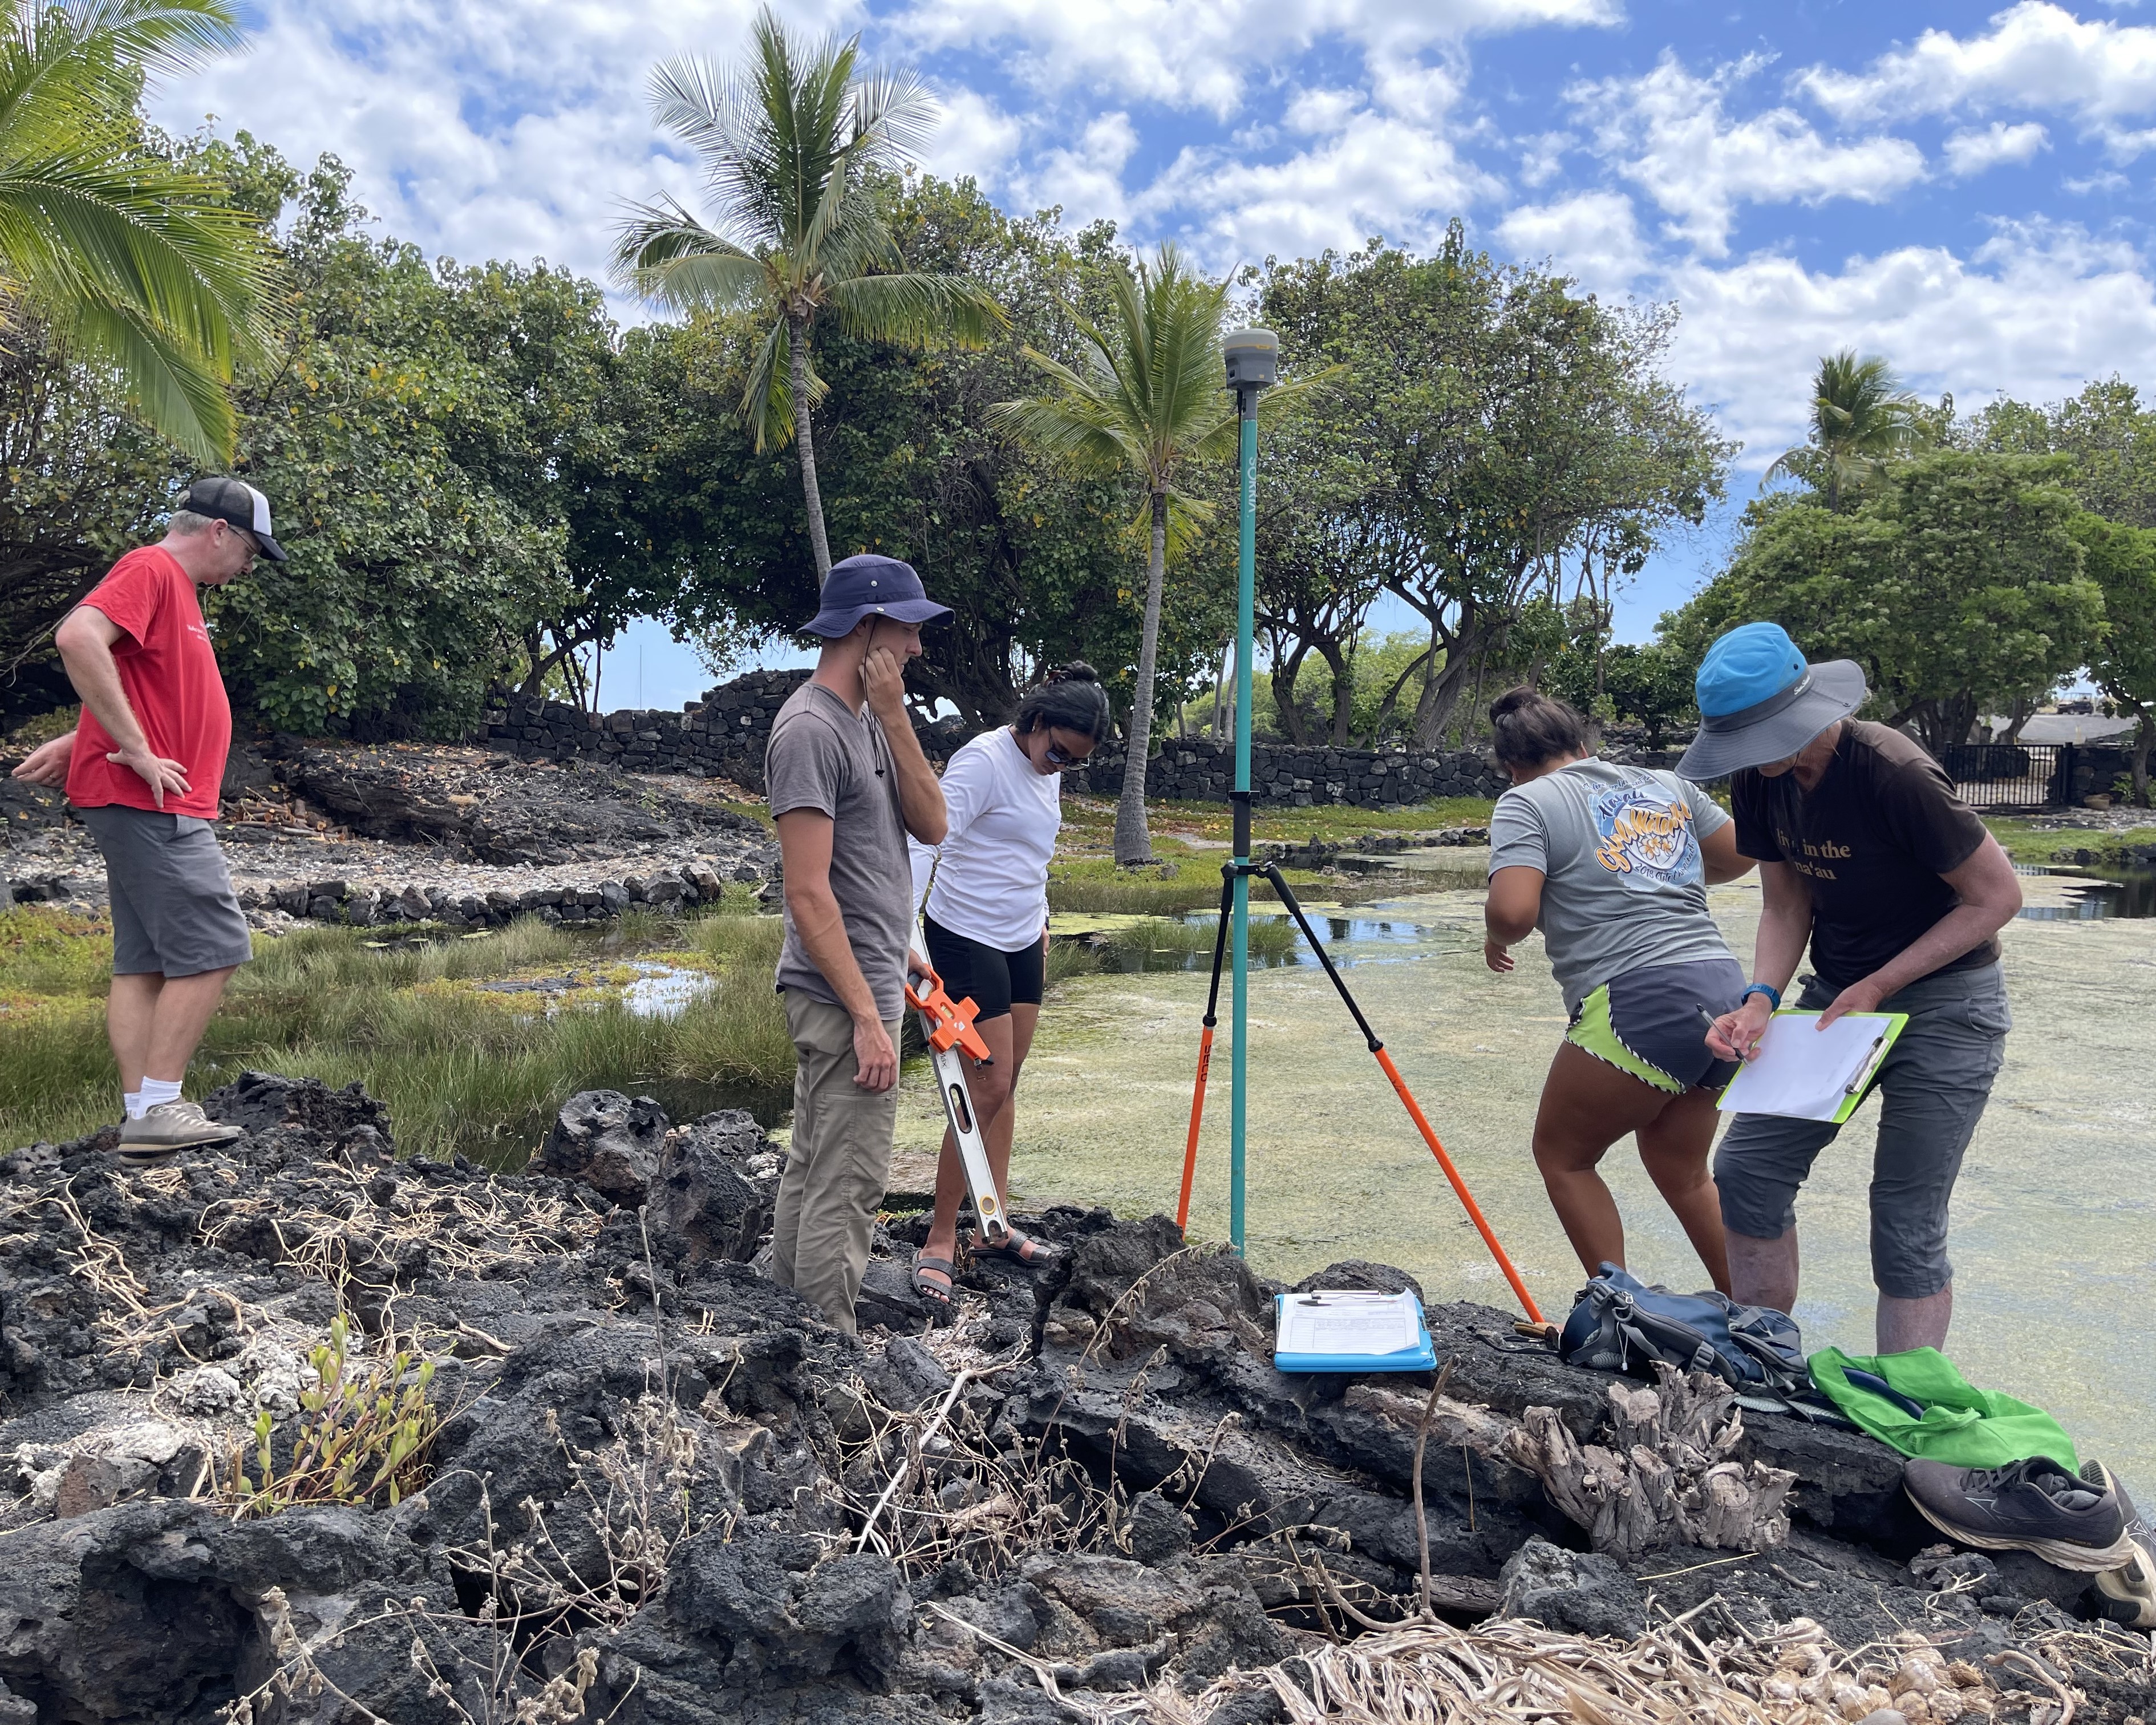 Students and Faculty with equipment taking measurements on the Hawaiʻi coast